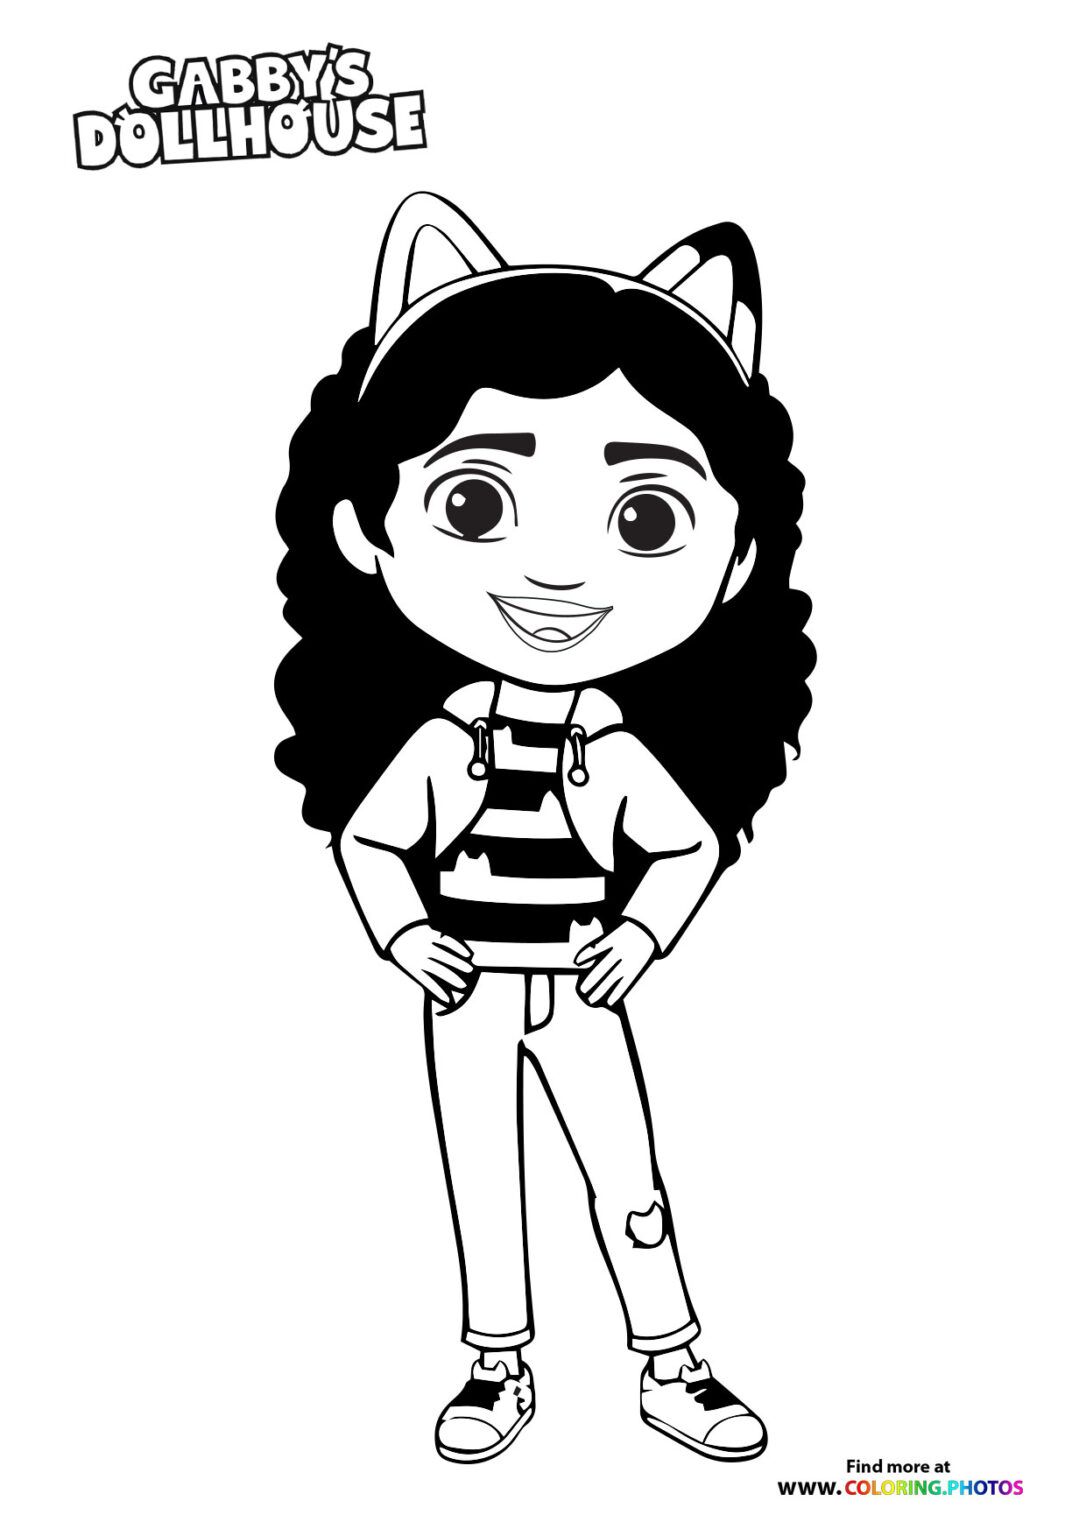 Gaby's Dollhouse coloring pages | Free ...